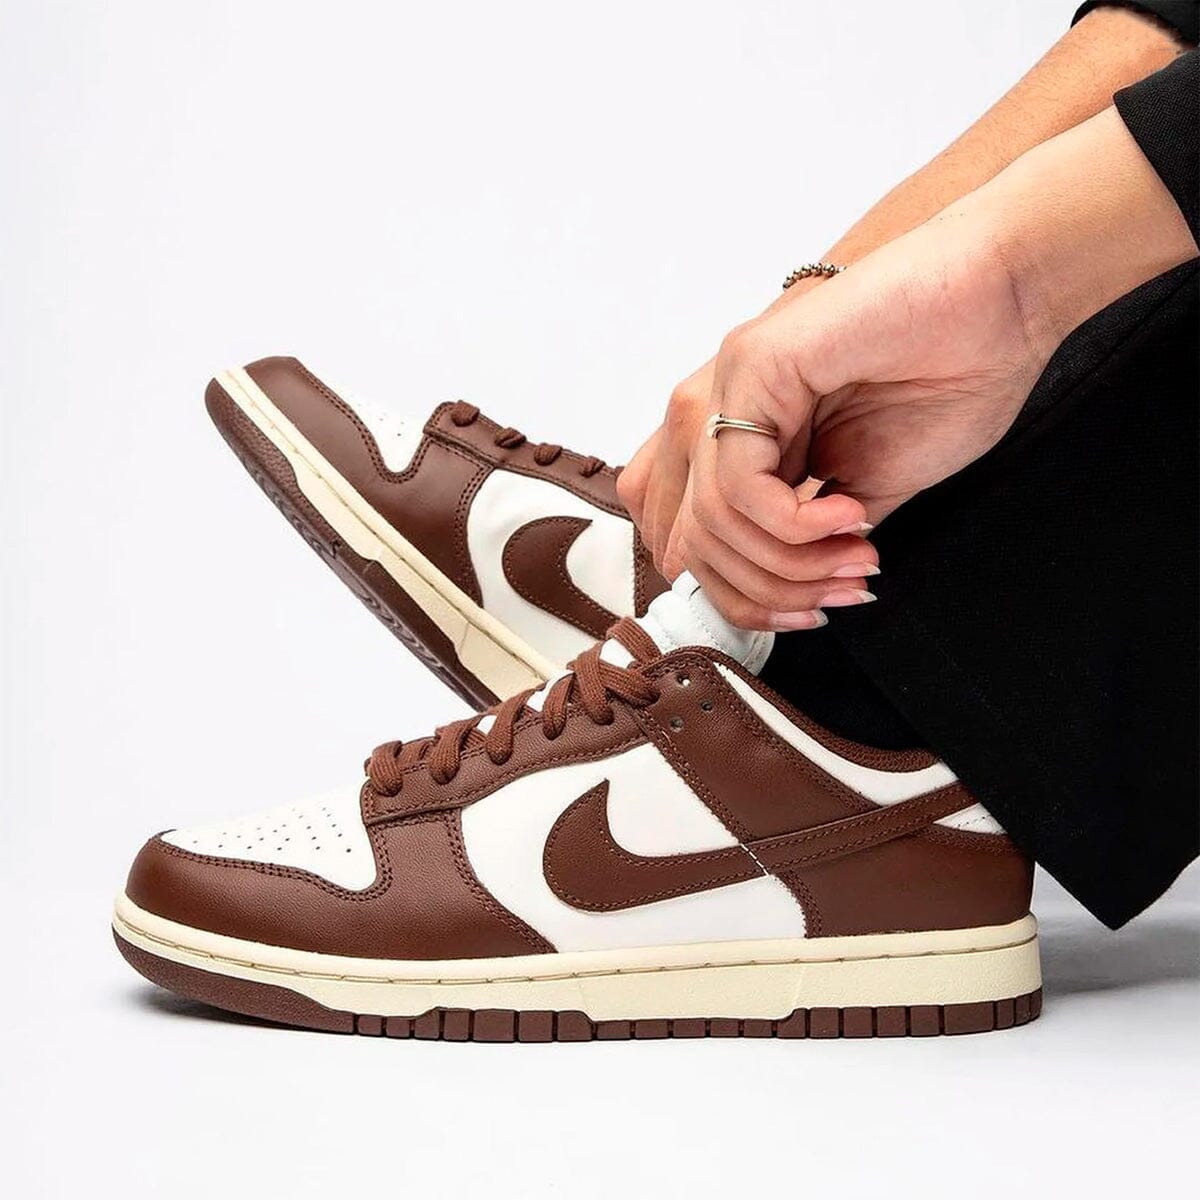 Nike Dunk Low Cacao Wow Chocolate Nike Dunk Low Blizz Sneakers 